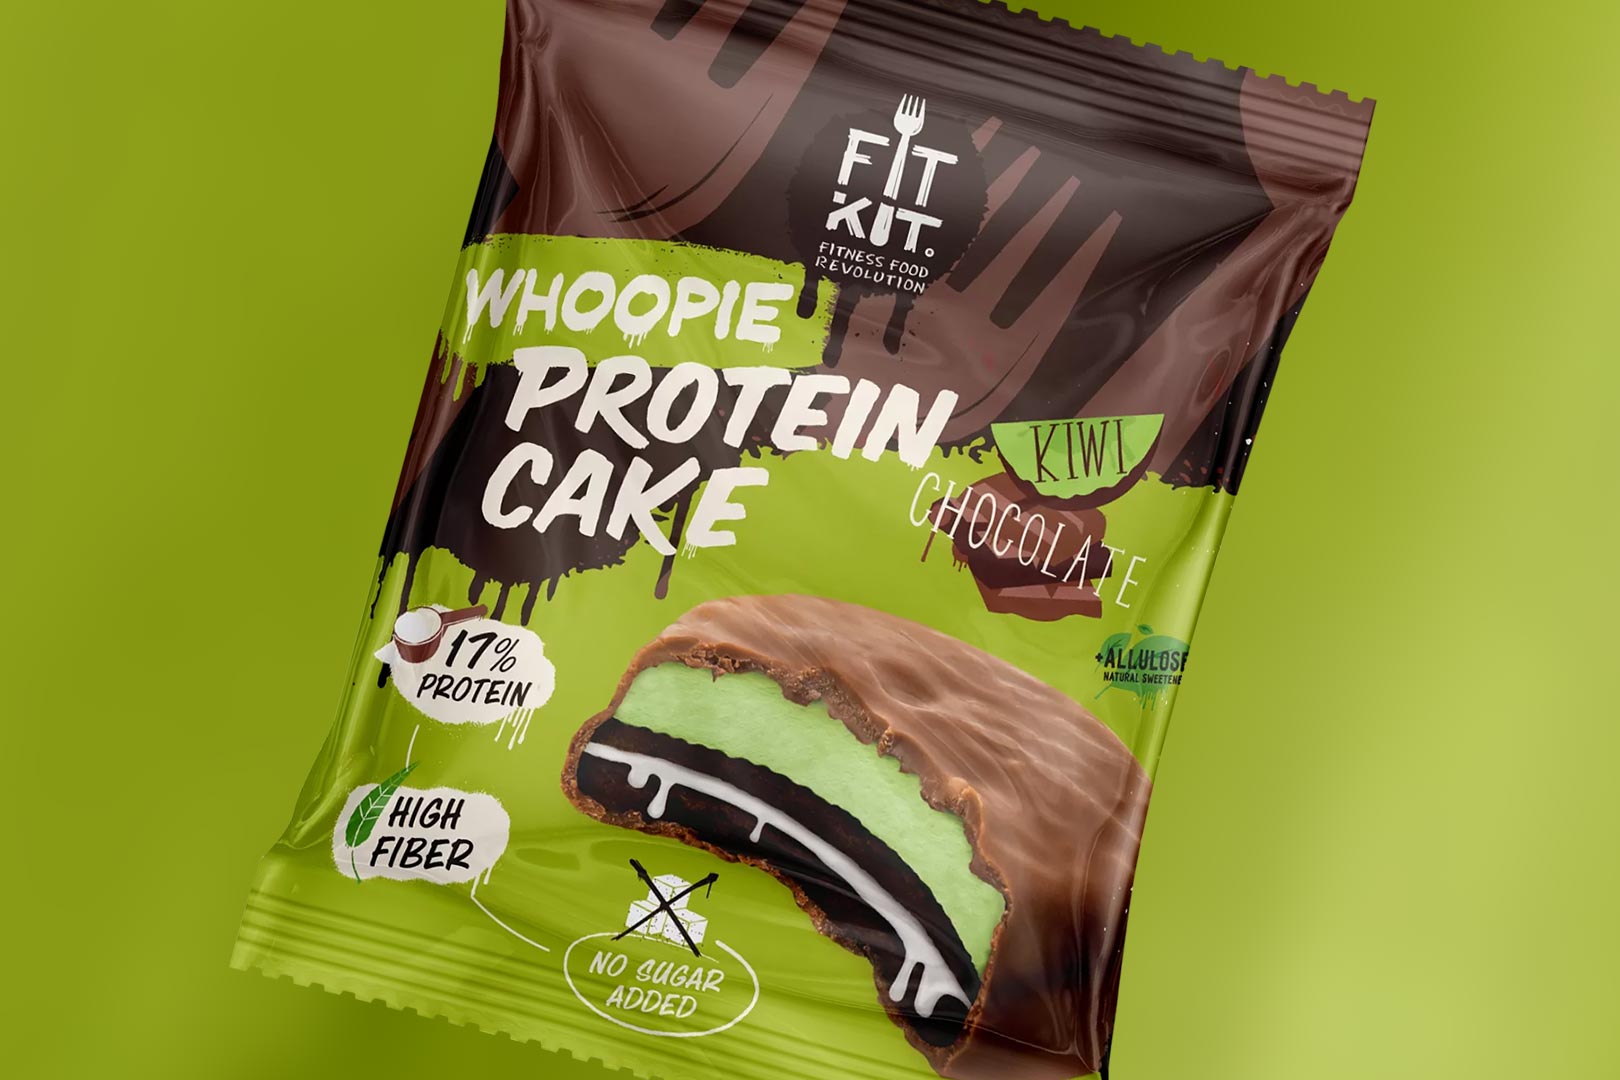 https://www.stack3d.com/wp-content/uploads/2023/04/fit-kit-whoopie-protein-cake.jpg